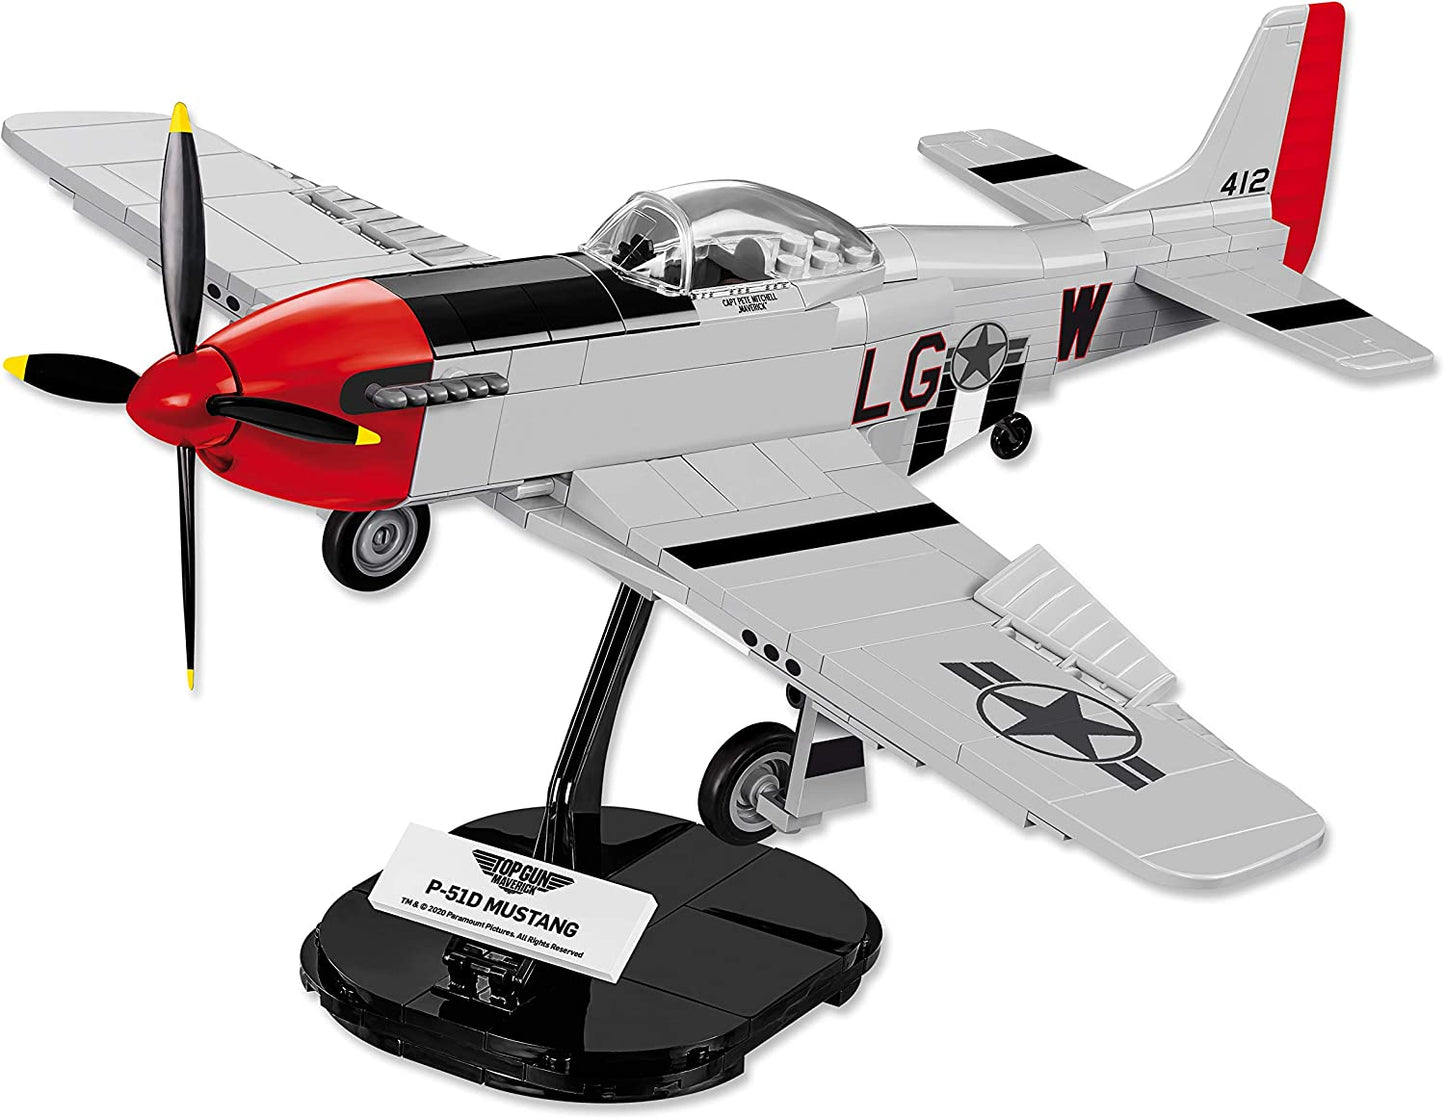 A full assembled Top Gun Mustang P-51D aircraft built from a kit. The aircraft is on a display stand with a Top Gun plaque.